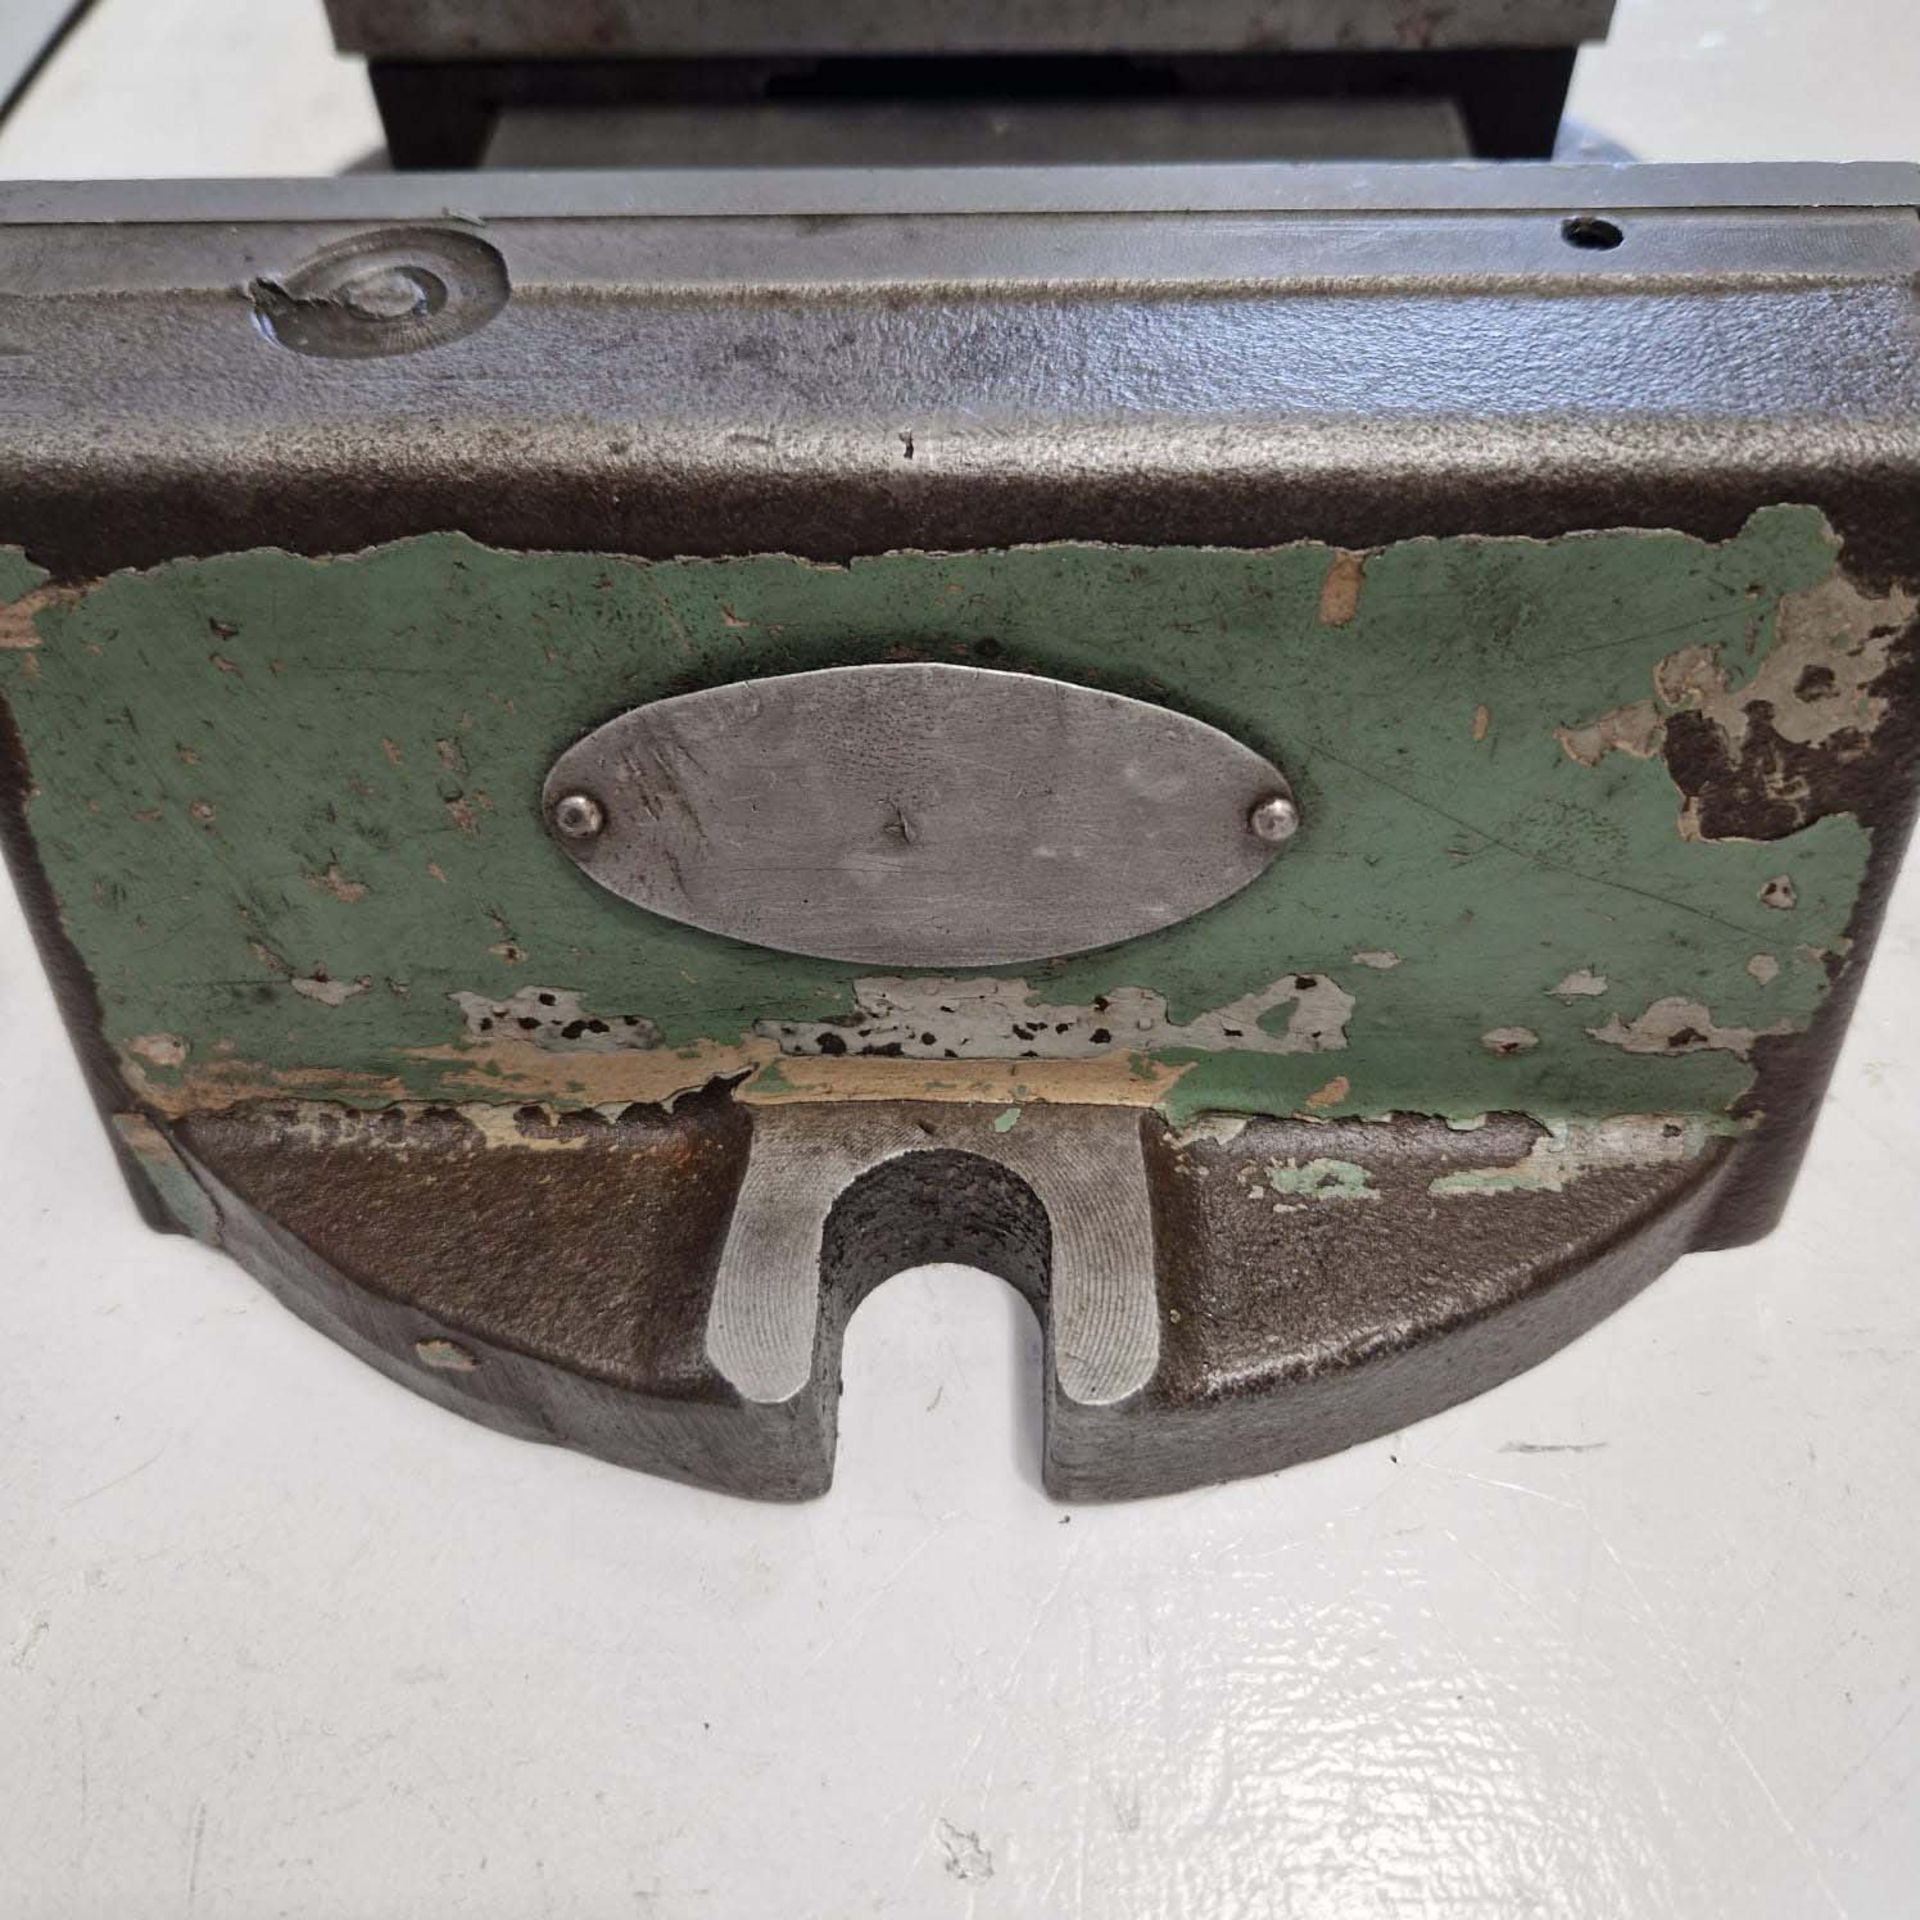 Abwood 6" Machine Vice. Width of Jaws 6 1/2". Height of Jaws 1 3/4". Max Opening of Jaws 6". - Image 6 of 7